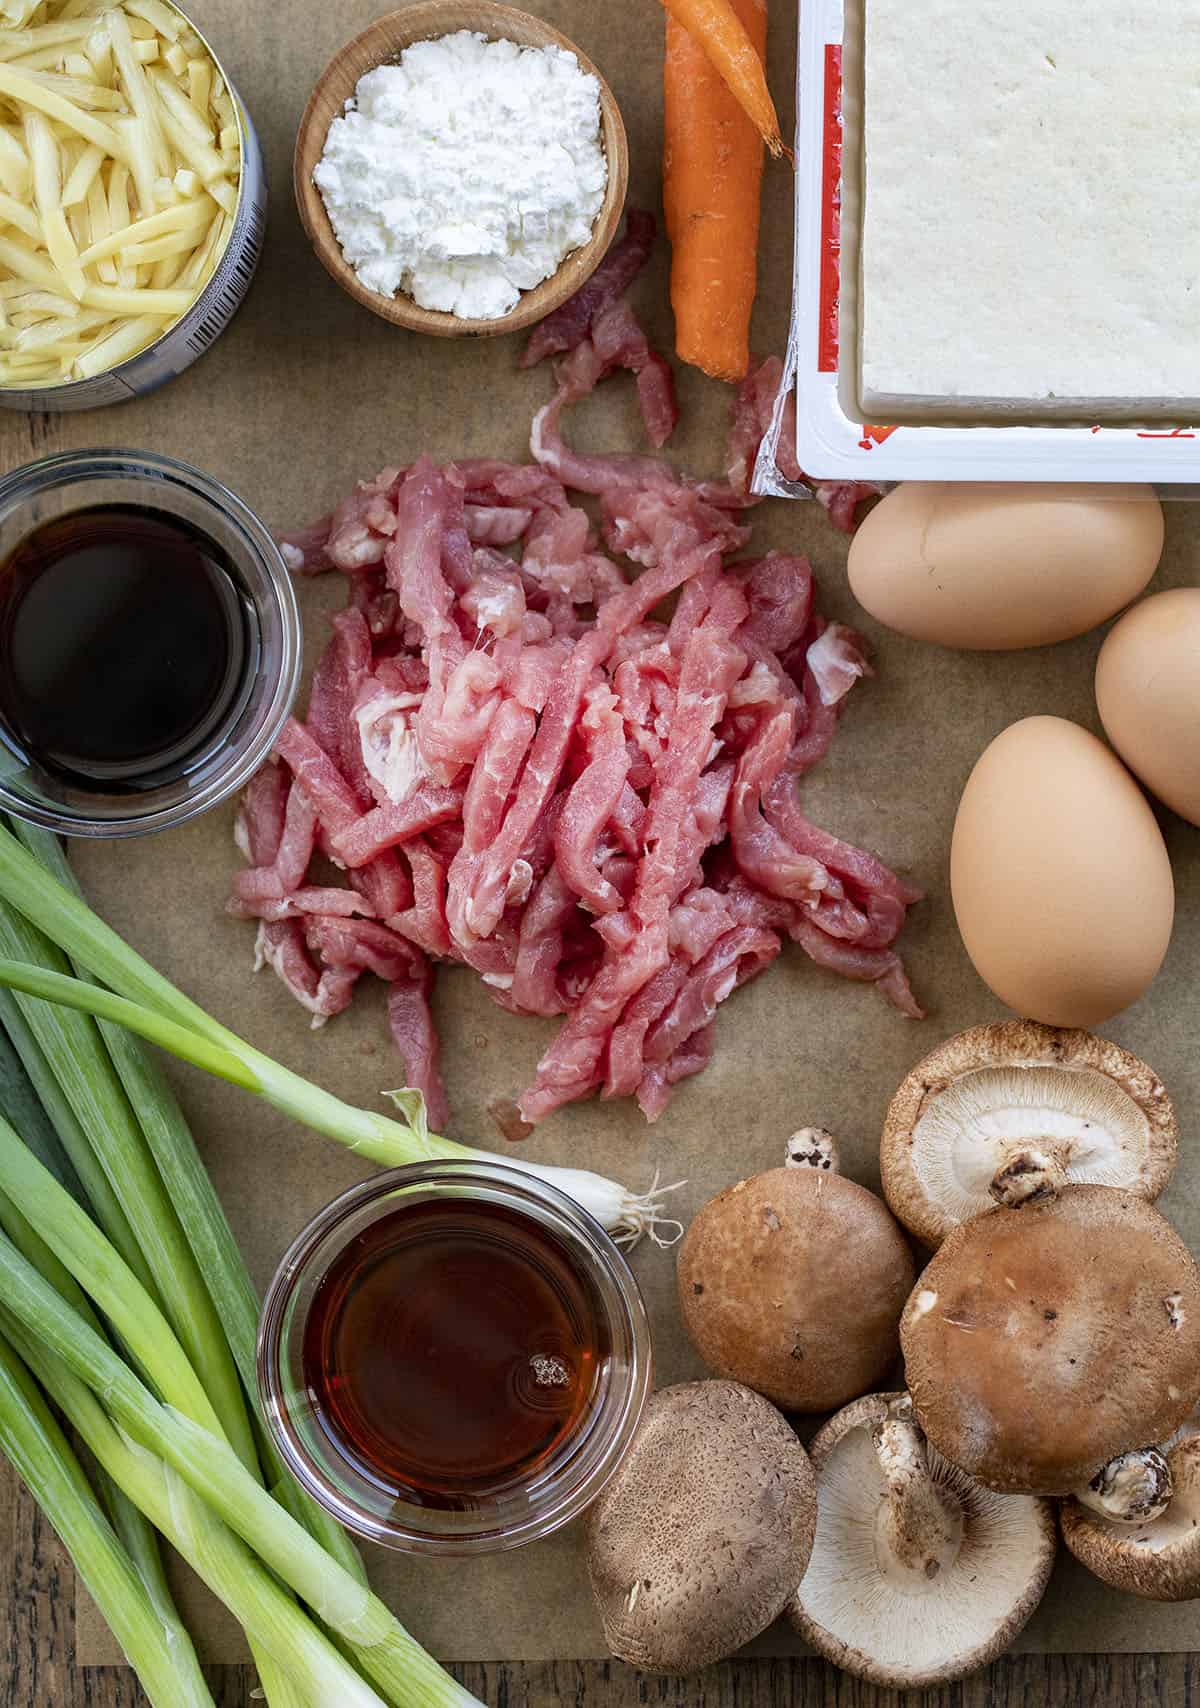 Raw Ingredients for Making Hot and Sour Soup. Dinner, Supper, Soup, Asian inspired Soup, Hot & Sour Soup, Hot Sour Soup, Easy Soups, Soup Recipes, Fall Soups, Winter Soups, recipes, i am homesteader, iamhomesteader